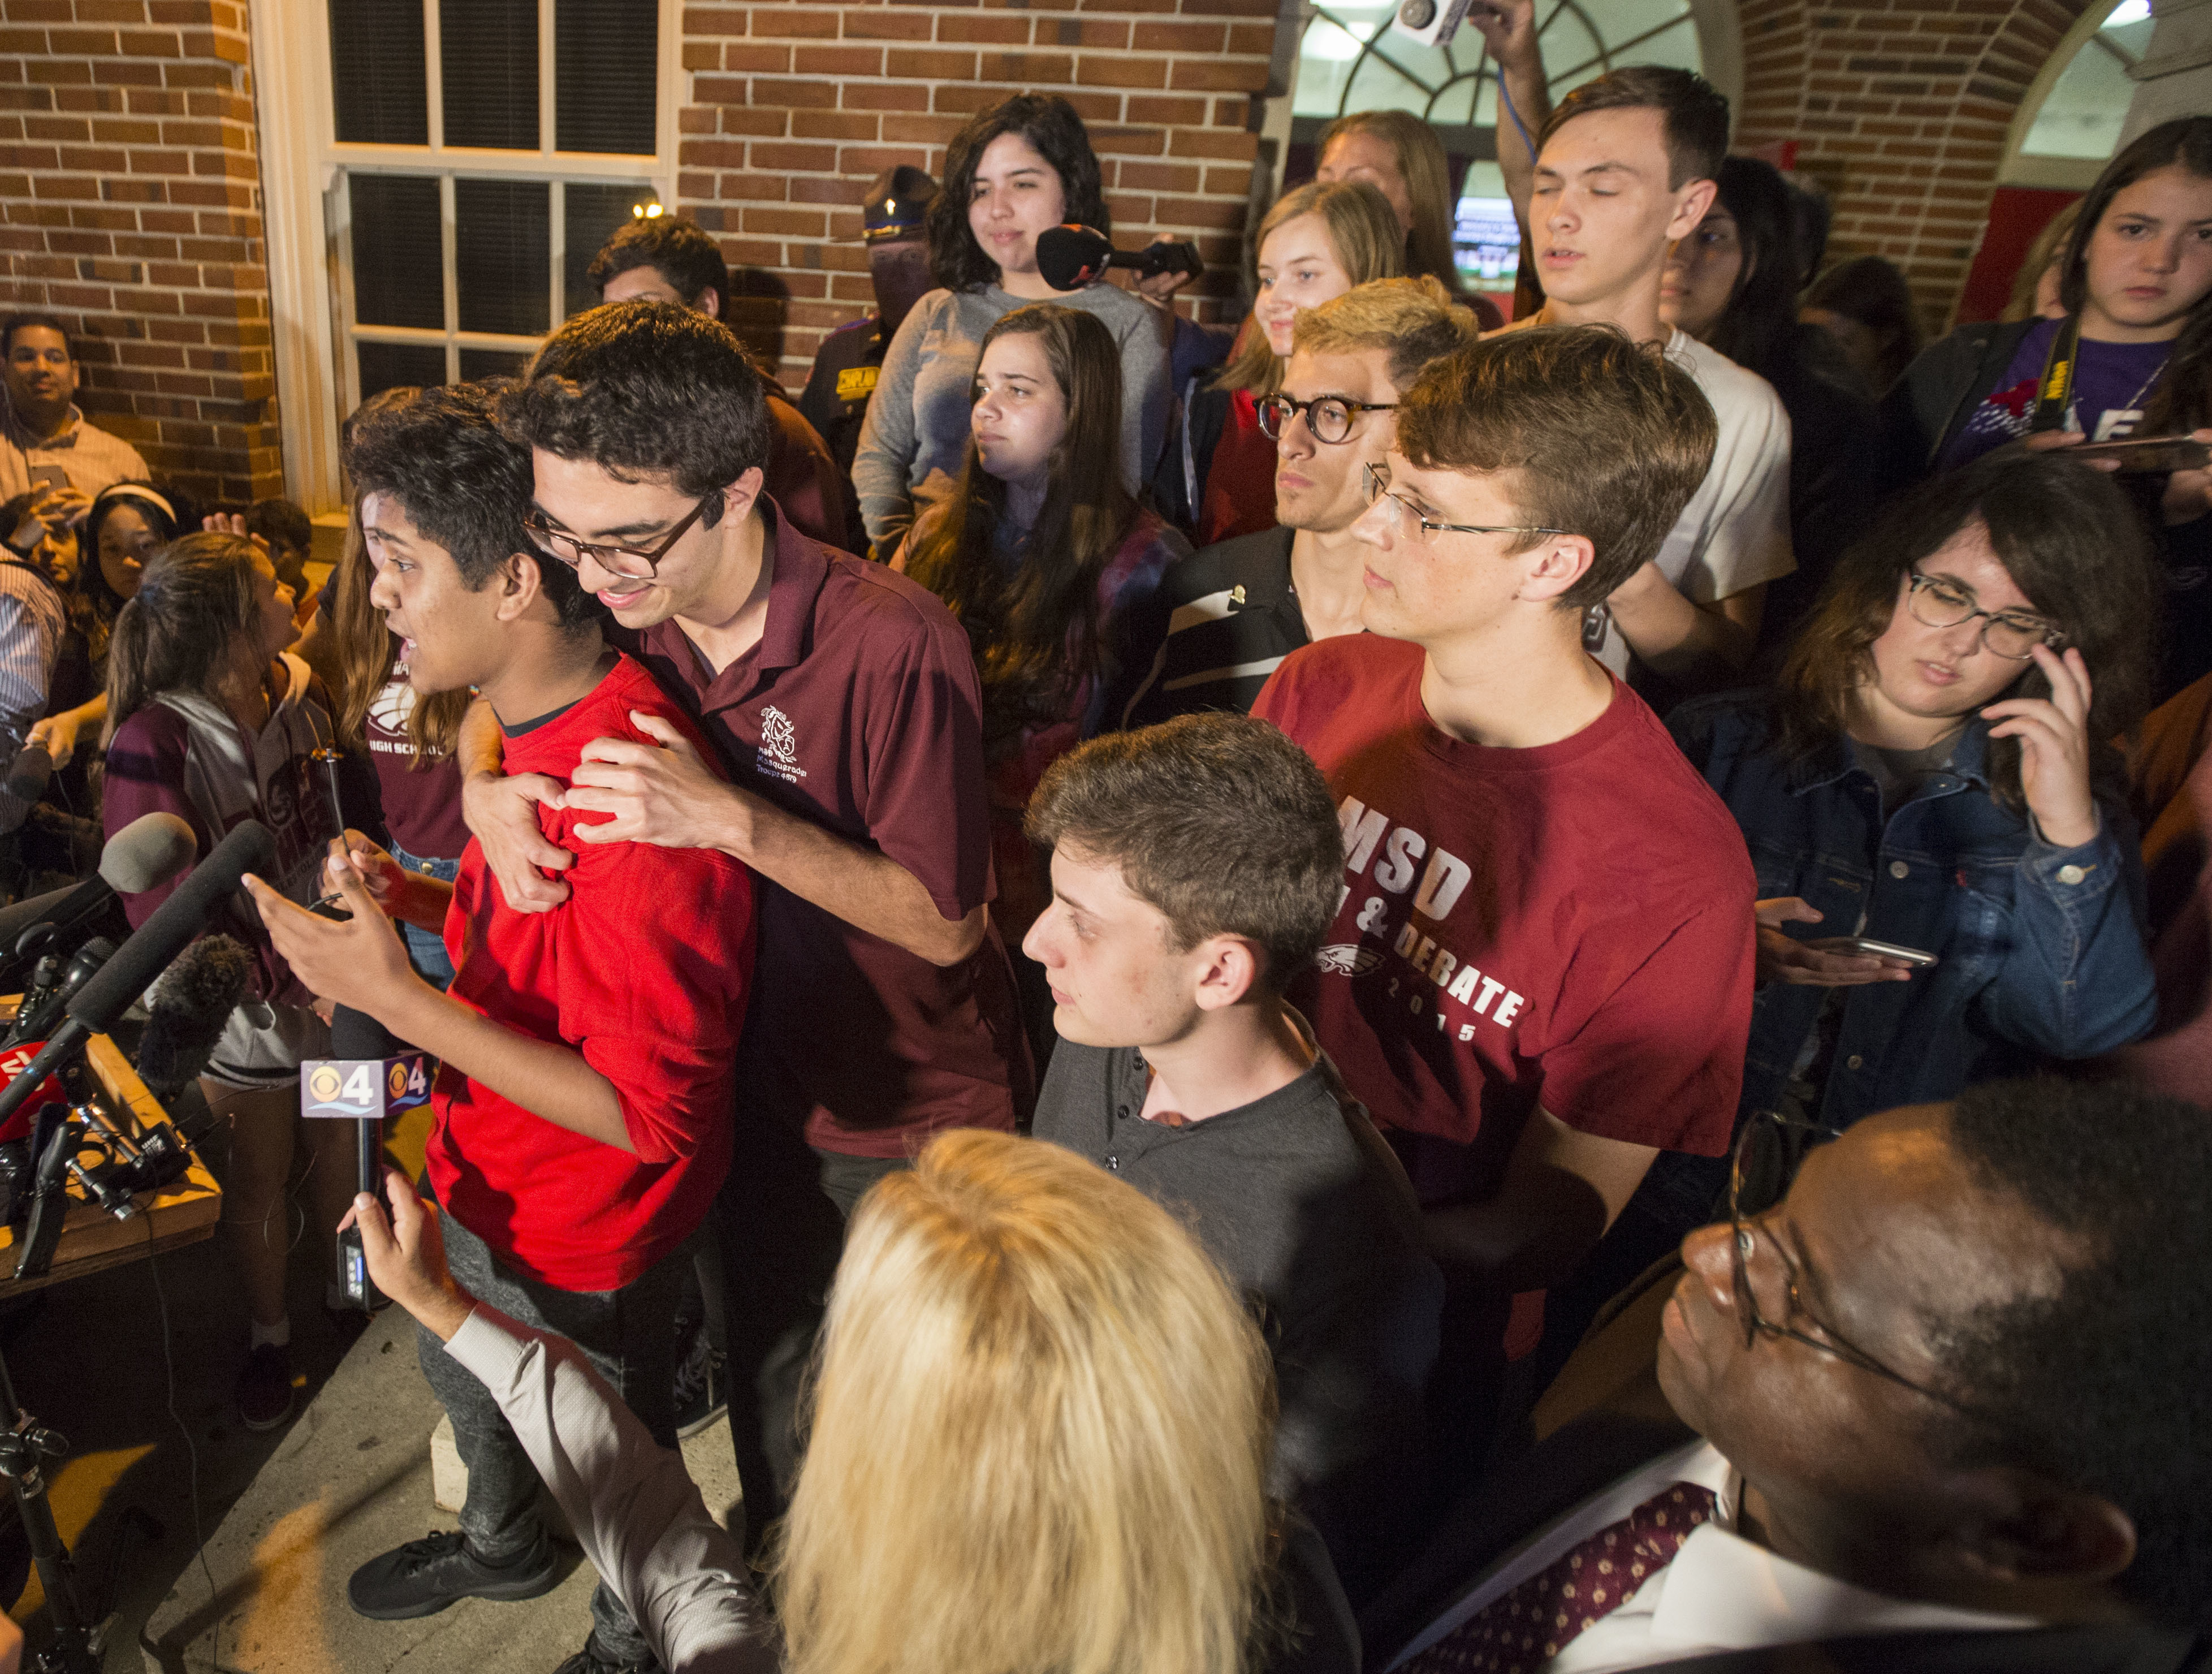 Marjory Stoneman Douglas High School survivors Tanzil Philip, left, is comforted by fellow student Diego Pfeiffer as Philip speaks to Leon High School students after arriving in Tallahassee, Fla., Tuesday, Feb 20, 2018. The students from Douglas High School are in town to lobby the Florida legislature after a shooting at their school by a former student that left more than a dozen students and faculty dead and others injured last week. (AP Photo/Mark Wallheiser)